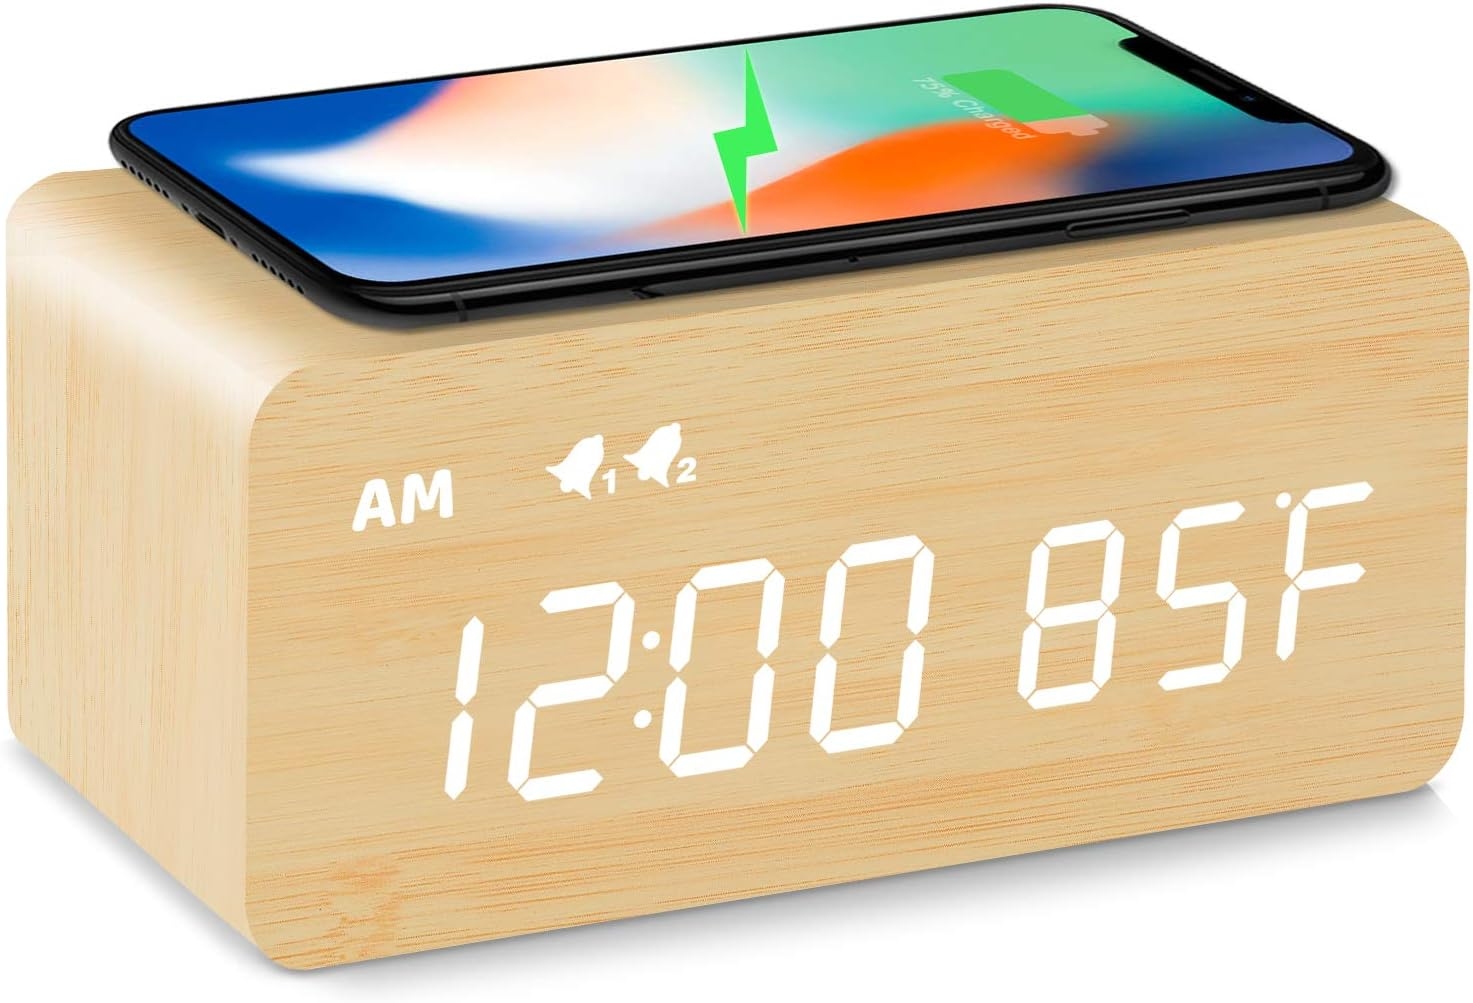 MOSITO Digital Wooden Alarm Clock with Wireless Charging, 0-100% Dimmer, Dual Alarm, Weekday /Weekend Mode, Snooze, Wood LED Clocks for Bedroom, Bedside, Desk, Kids (Bamboo)